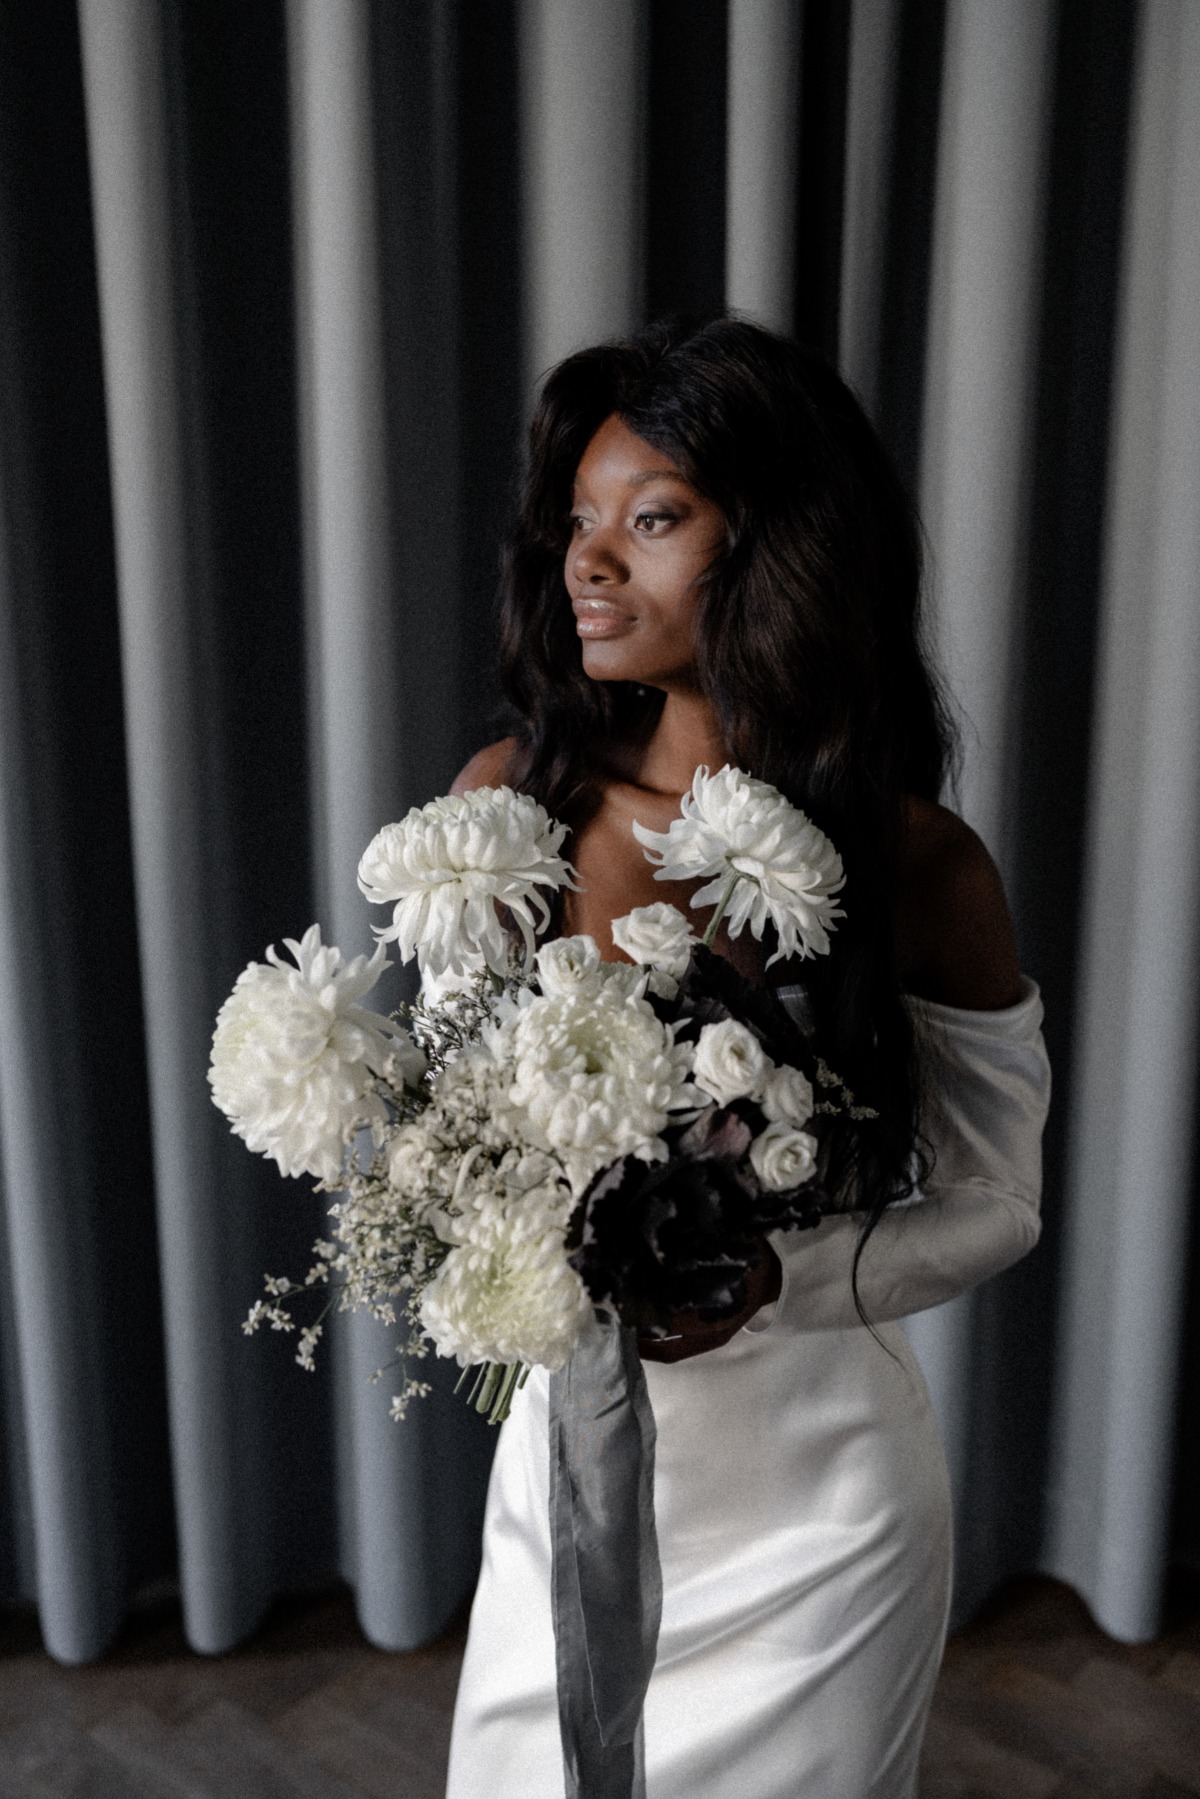 Bride in Two Souls wedding gown holding monochrome bouquet